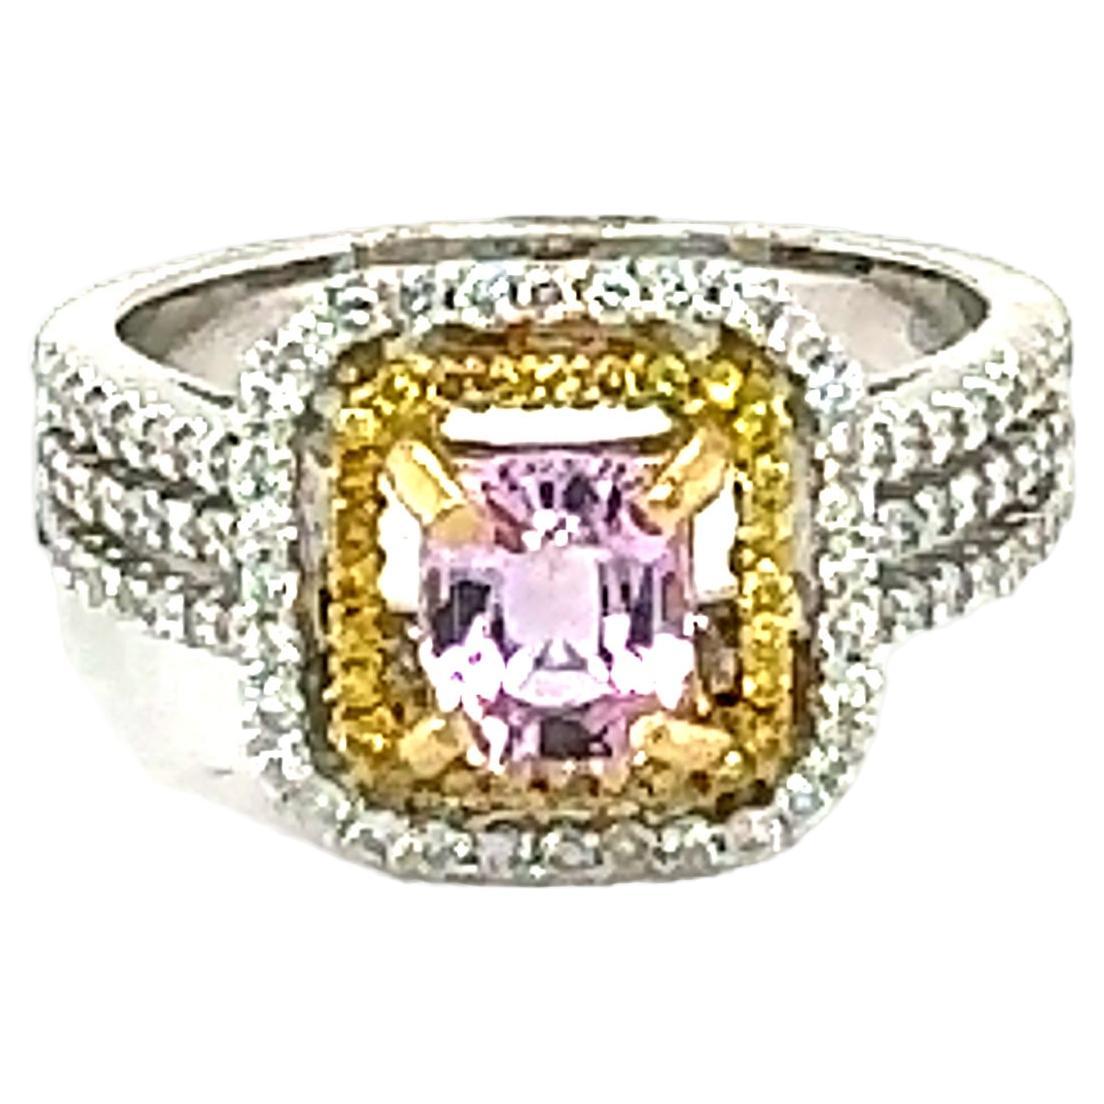 1.53 Carat Natural Unheated Pink Sapphire and Diamond Engagement Ring